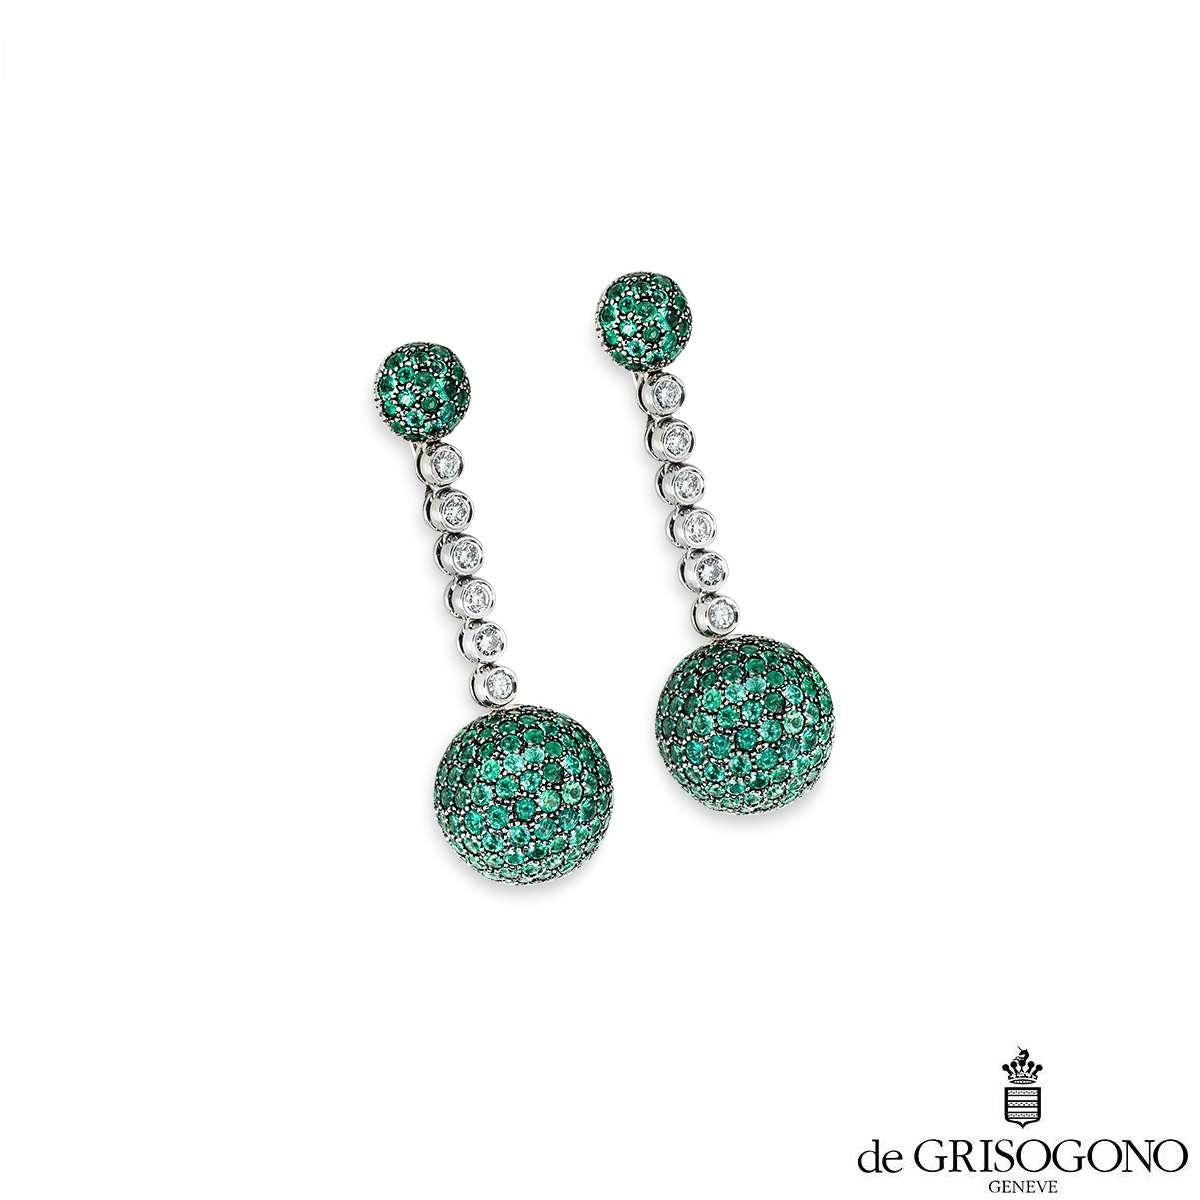 A pair of 18k white gold tsavorite and diamond drop earrings by De Grisogono, from the Boule collection. Starting with a dome design at the top pave set with vibrant tsavorite garnets, suspending 6 bezel set diamonds, with a total diamond weight of